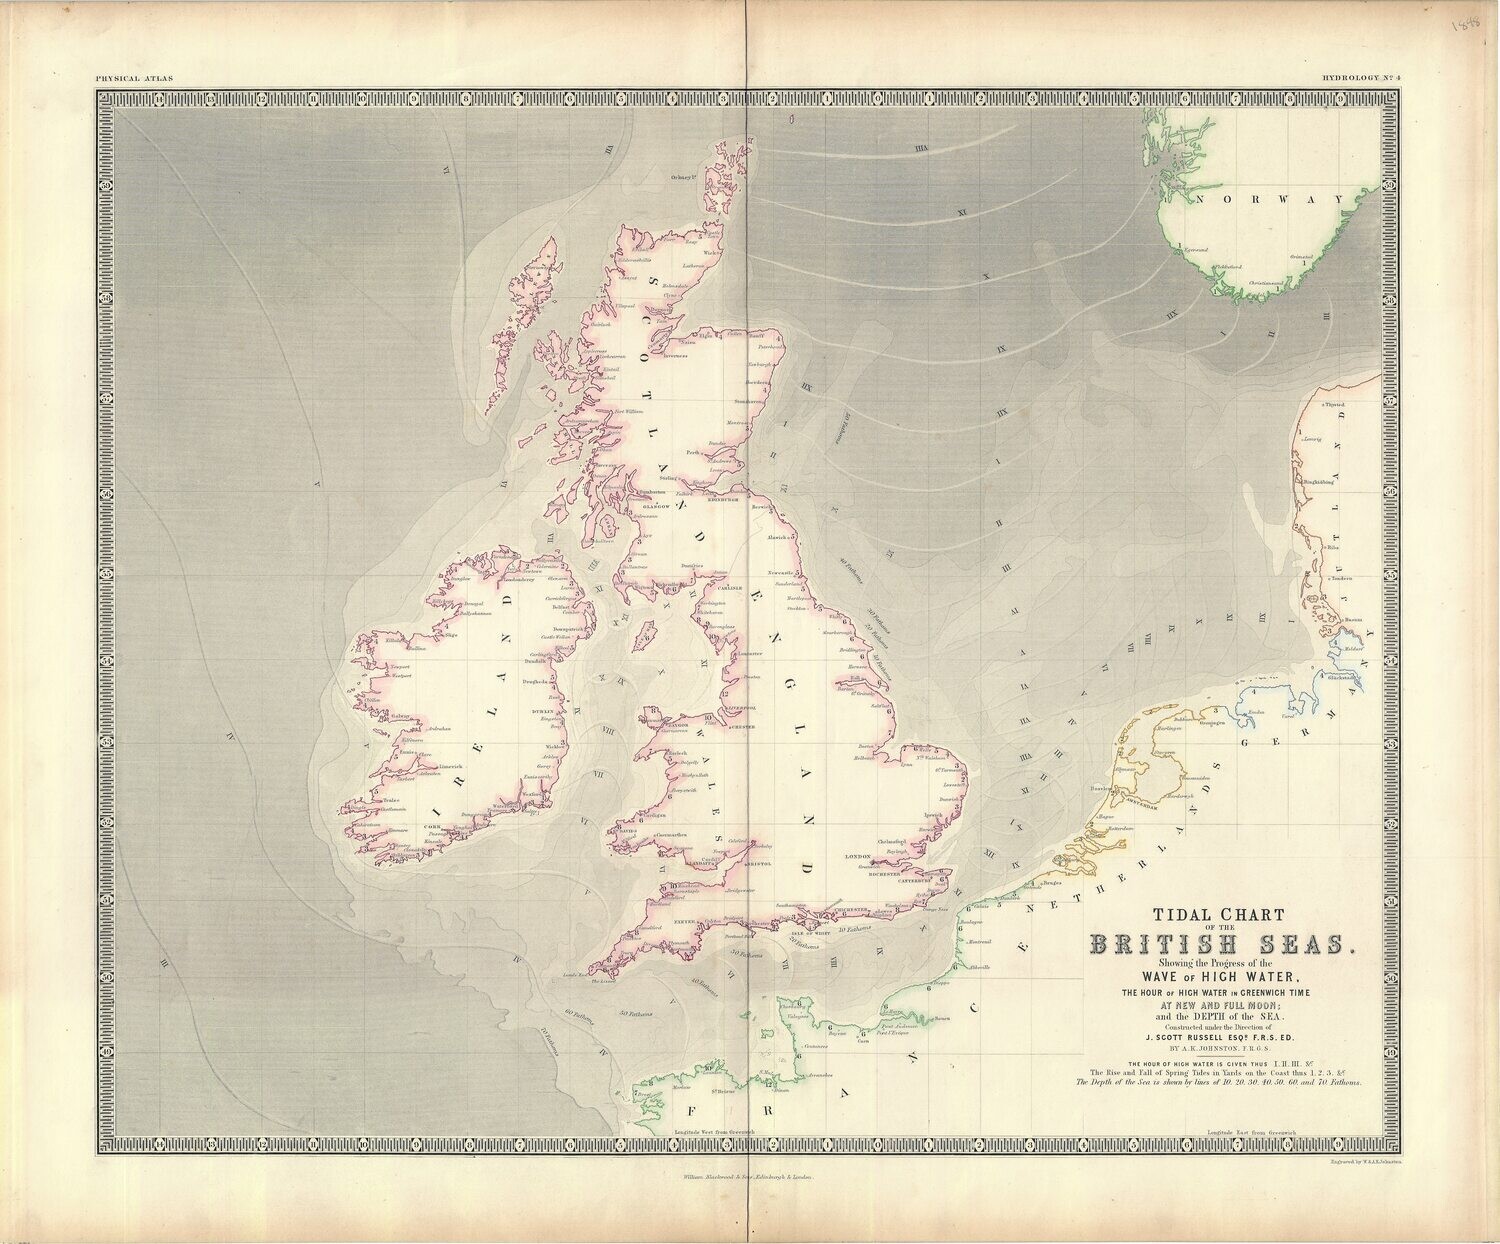 1848 Tidal Chart of the British Seas by A Keith Johnston